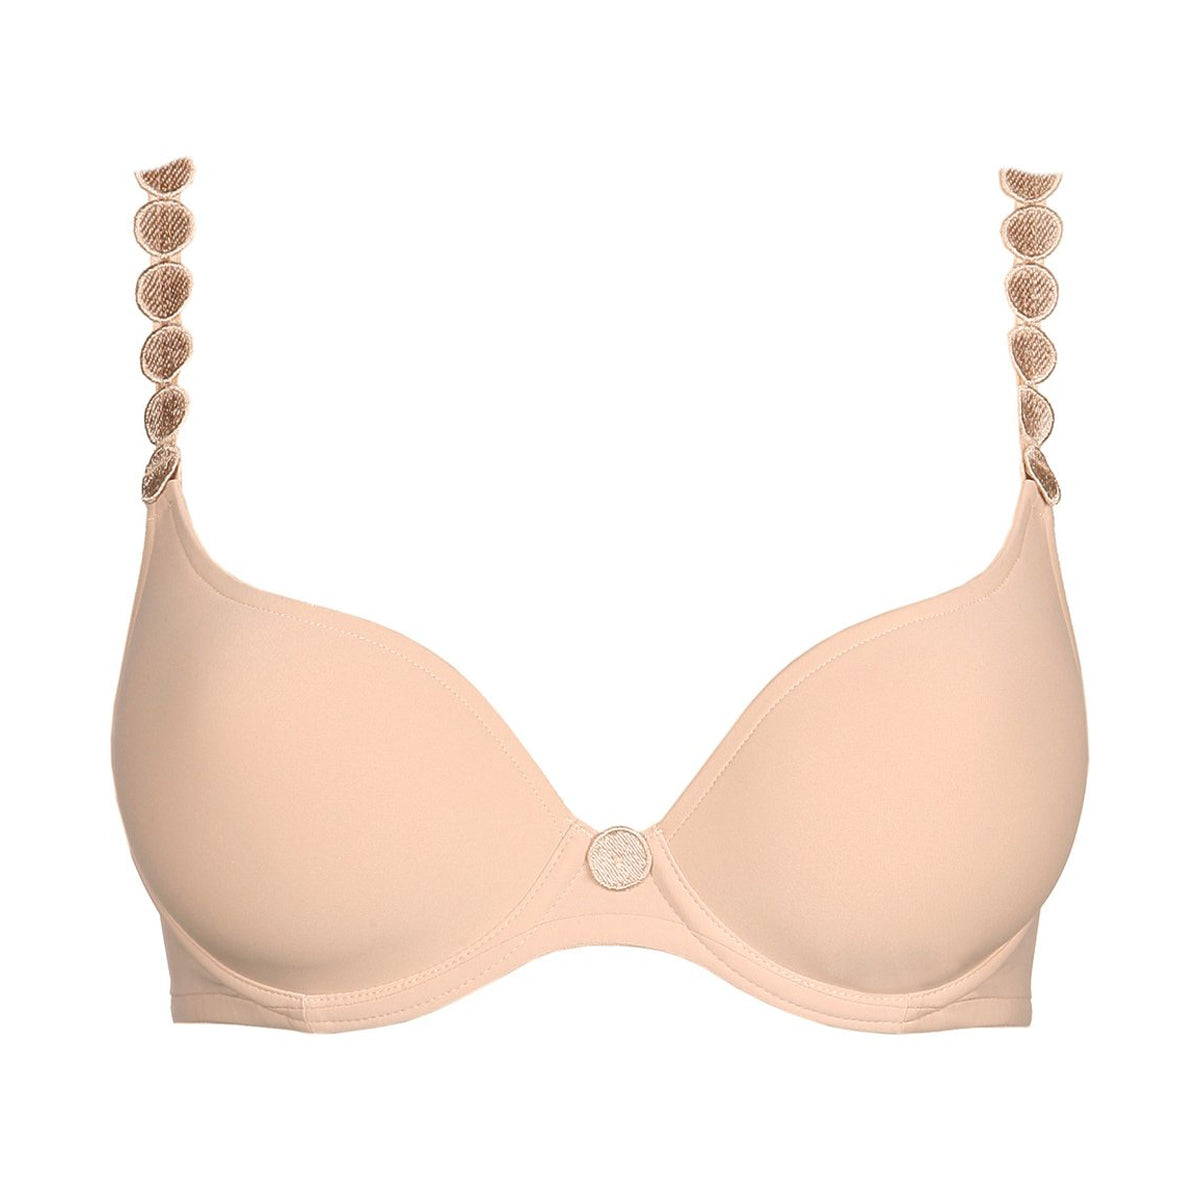 TOMMIE COPPER Womens White Shoulder Support Comfort Bra, Large